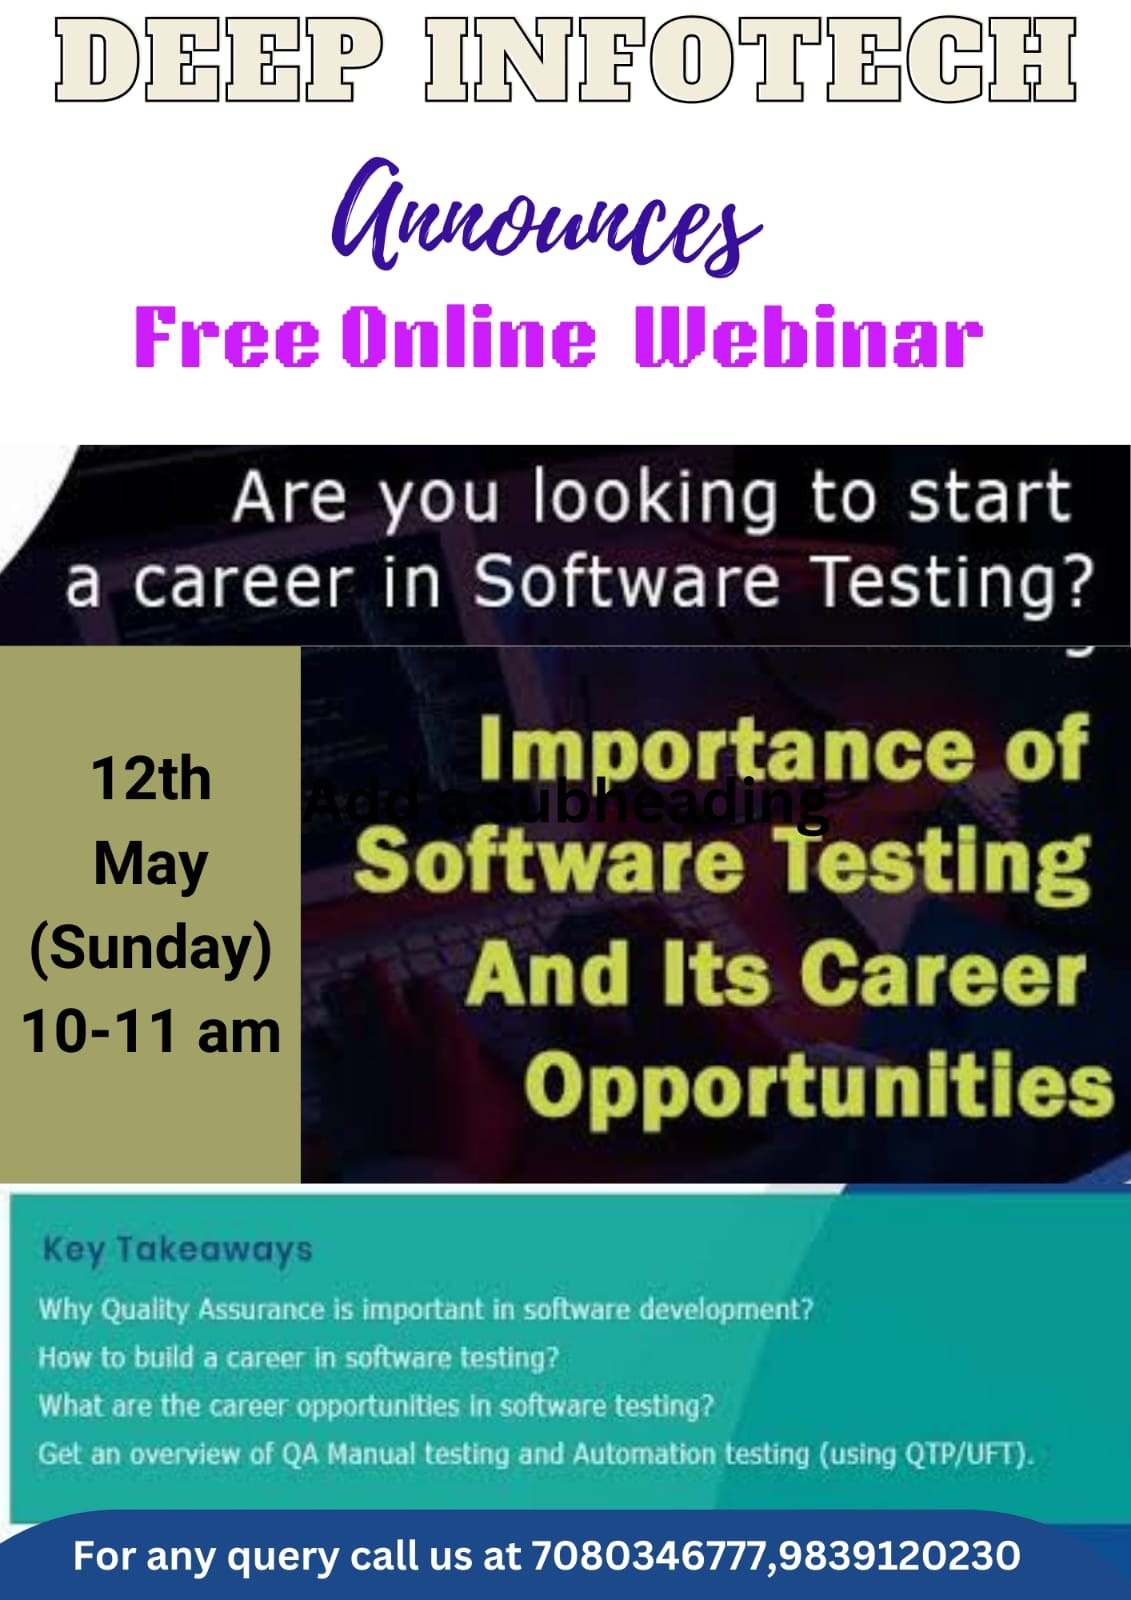 Free Online Webinar on Important of Software Testing